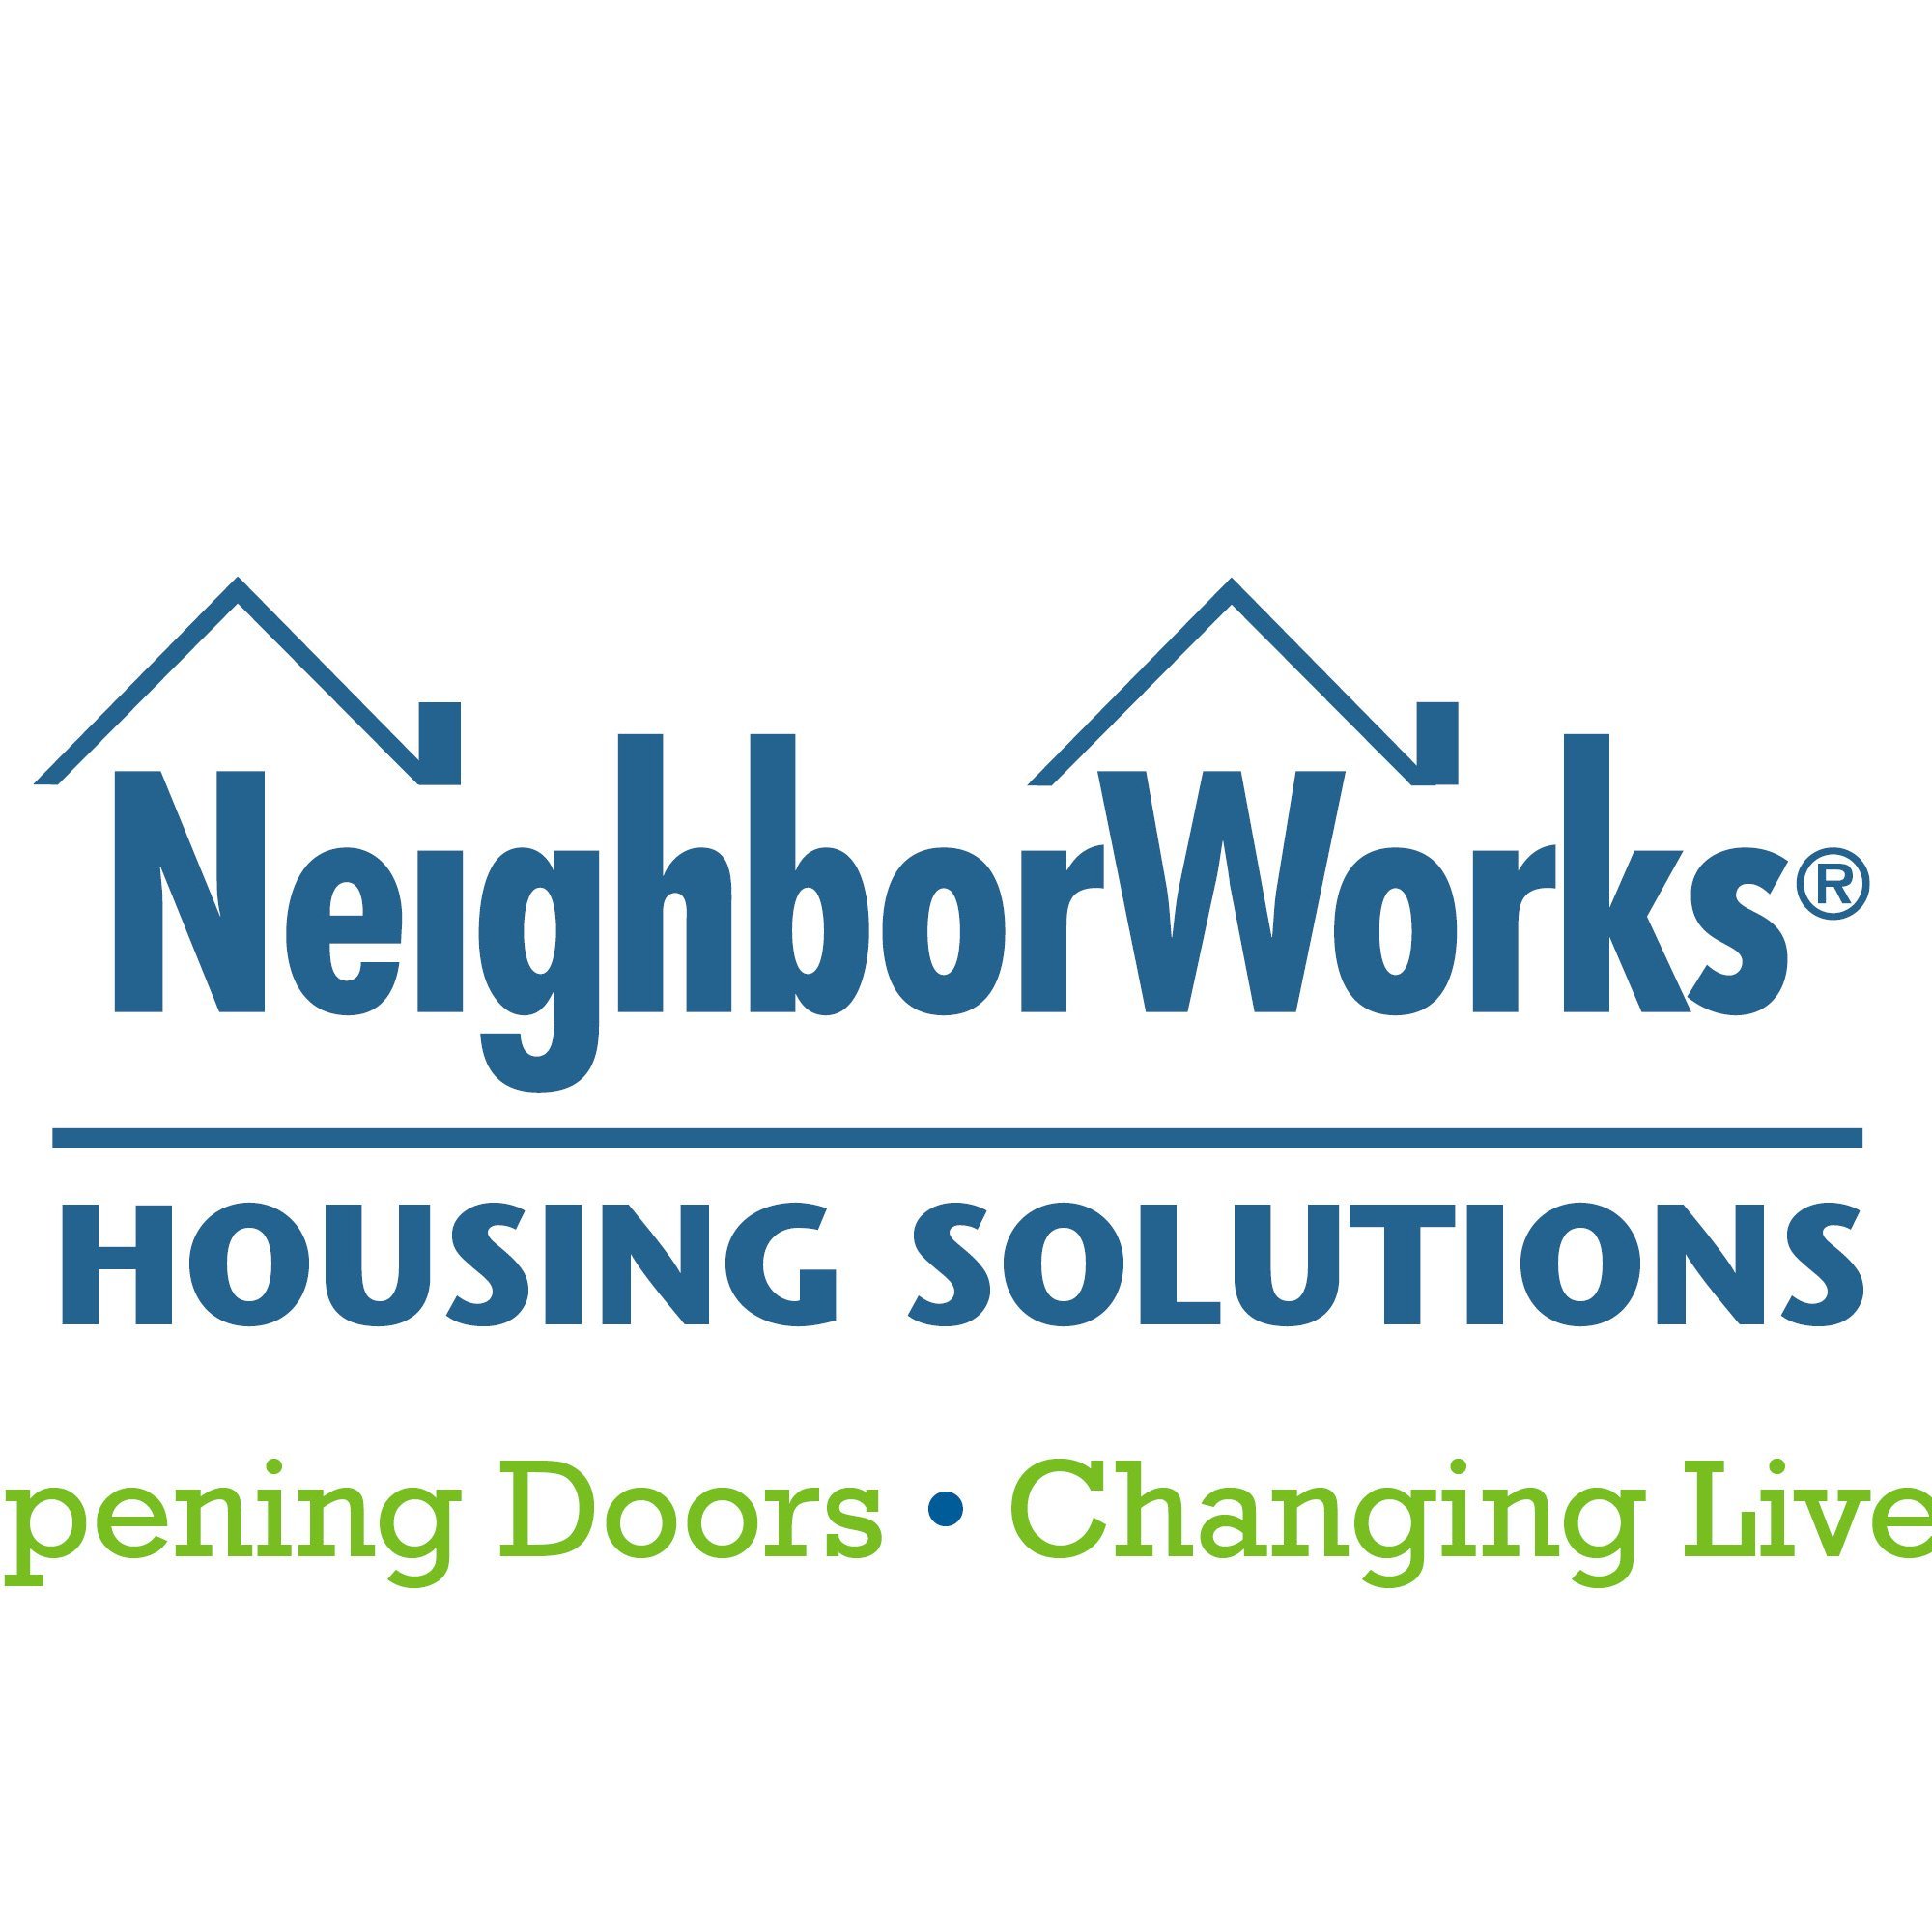 NeighborWorks® Housing Solutions provides safe, affordable, high-quality housing and growing financial skills throughout Southern Massachusetts.